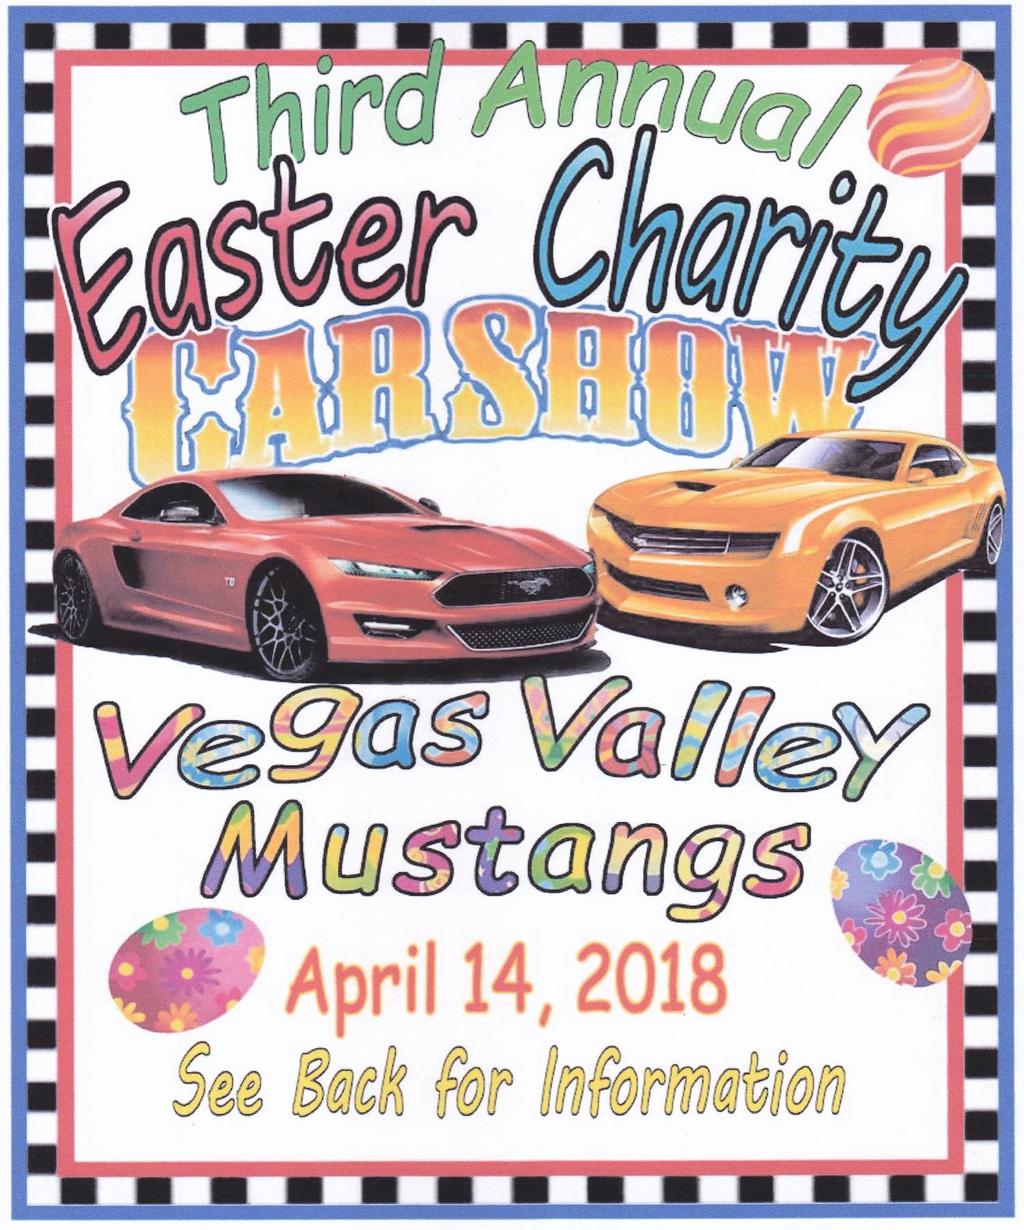 APRIL 2018 - SCHEDULE OF EVENTS Continued: 14 Easter Charity Car Show